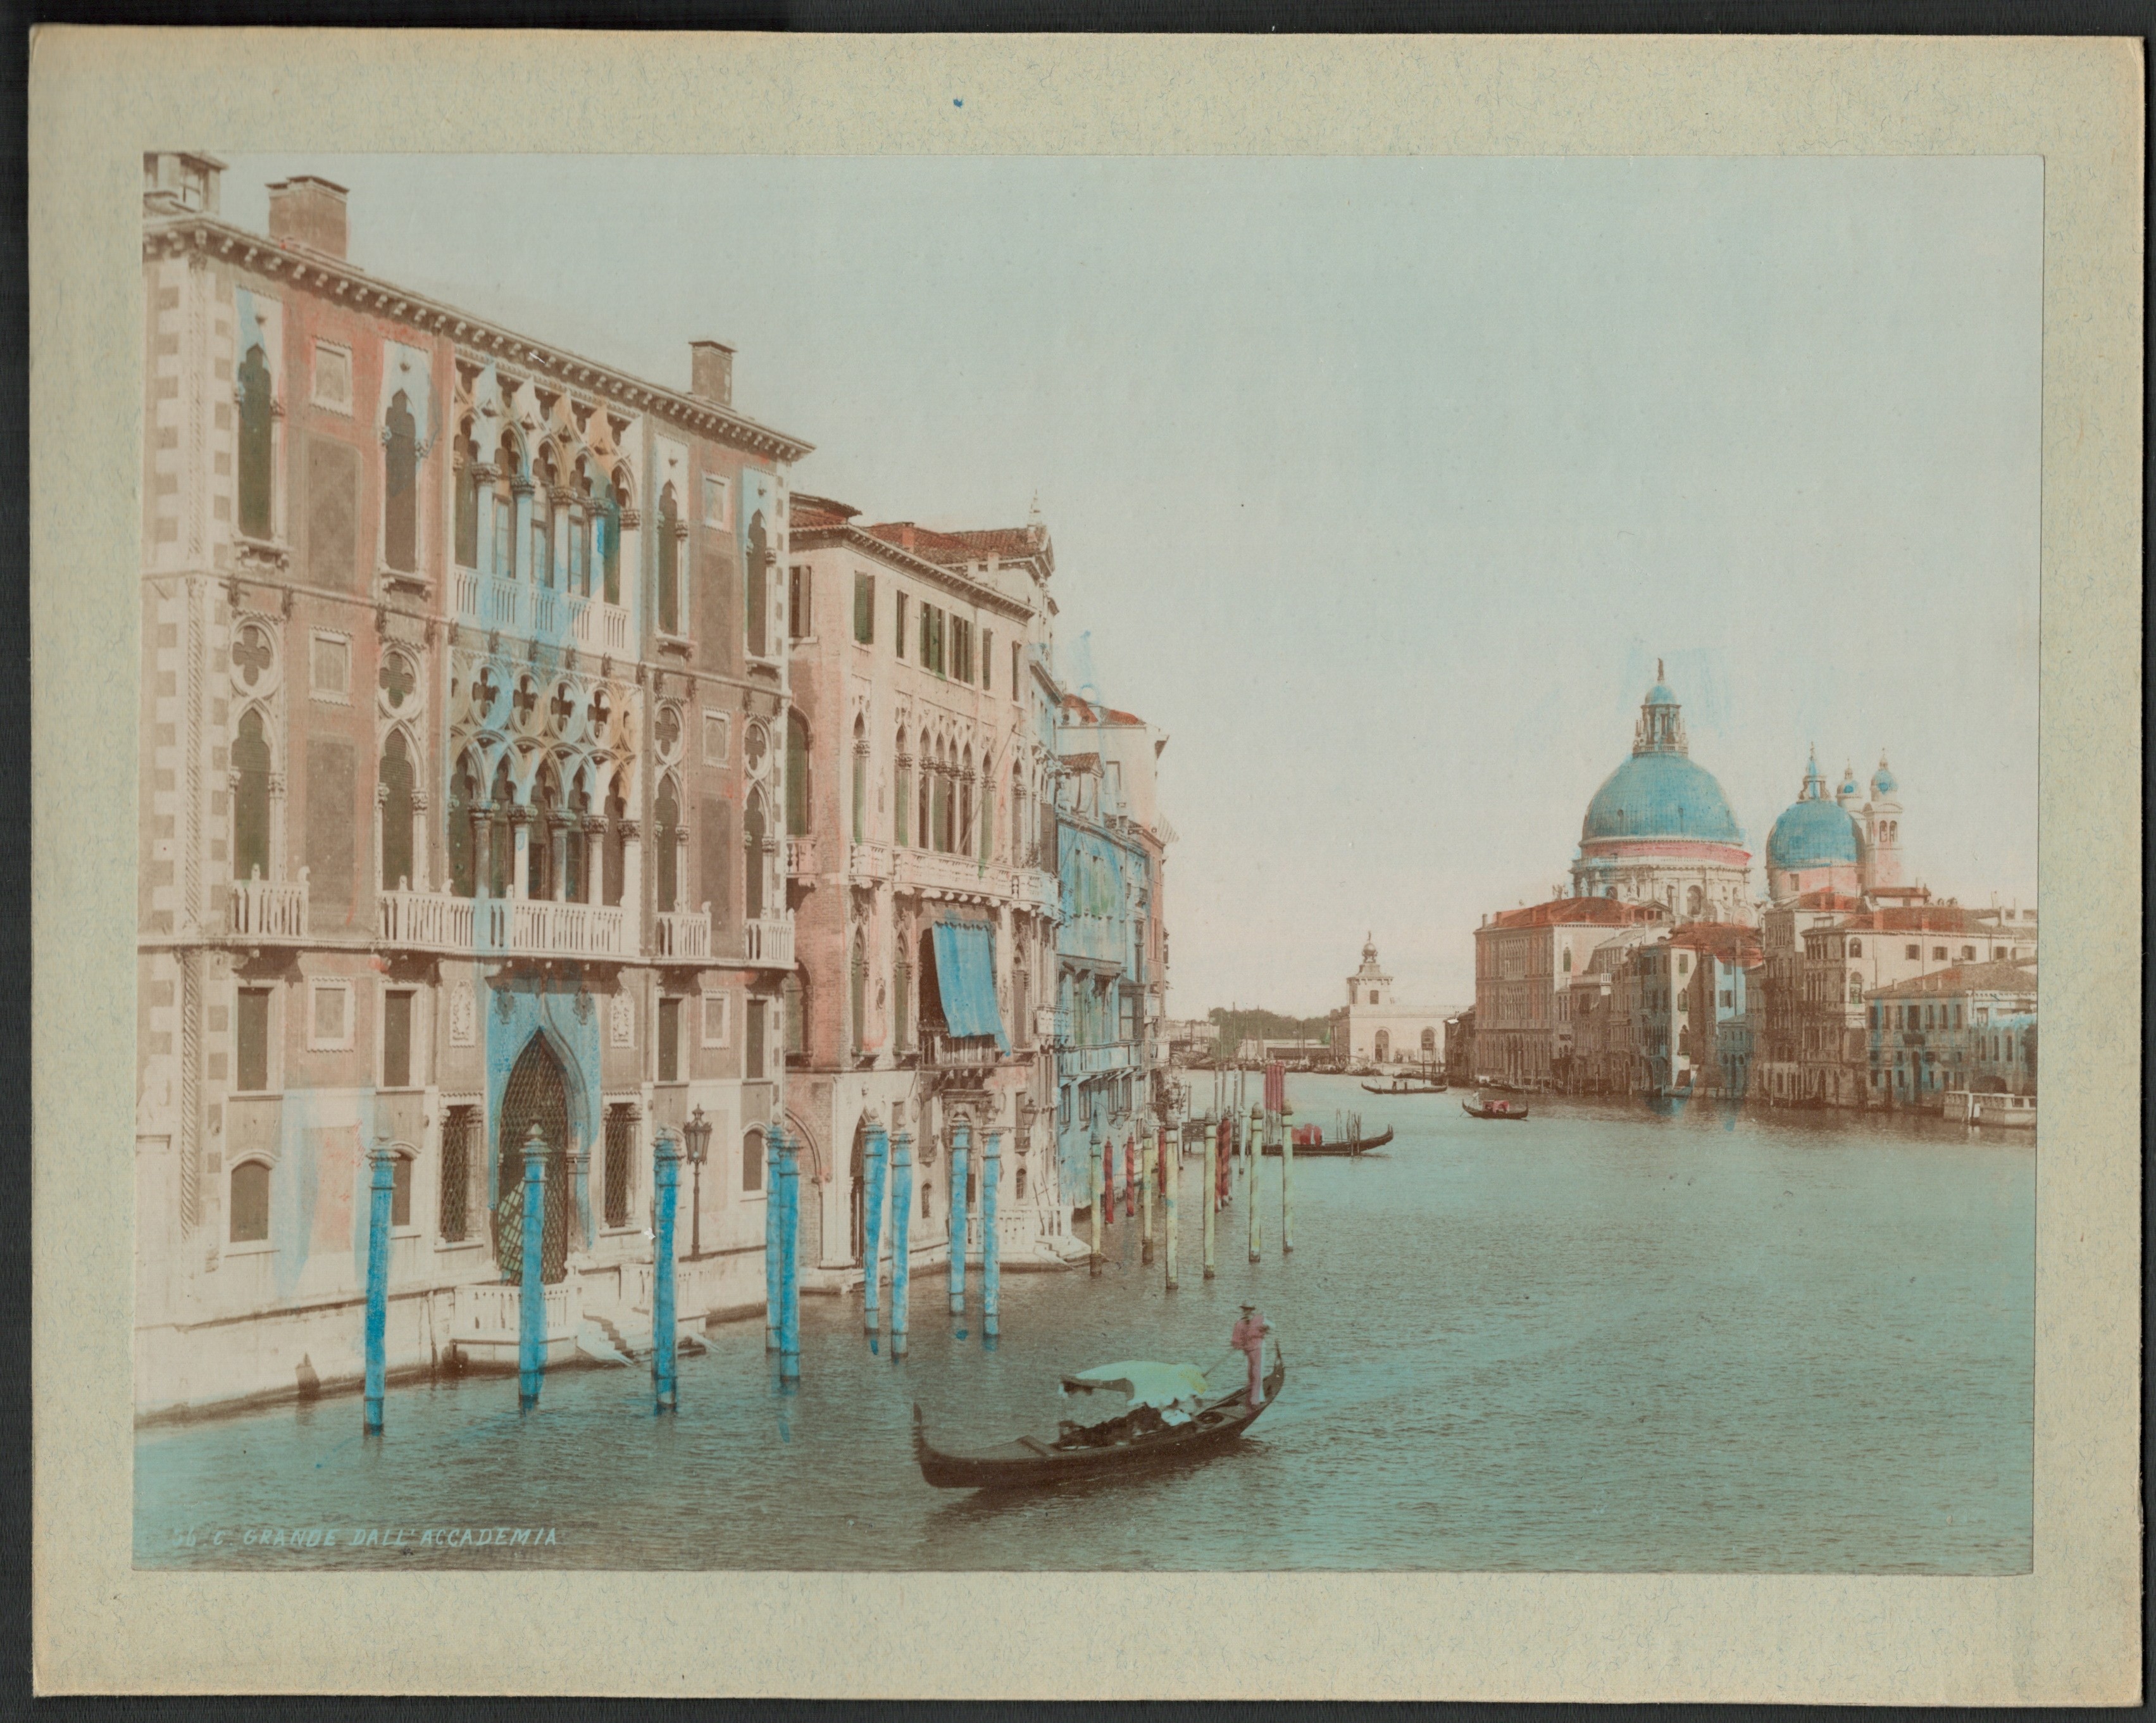 EARLY PHOTOGRAPH ON CARD OF GRANDE DALL ACCADEMIA VENICE (1908)